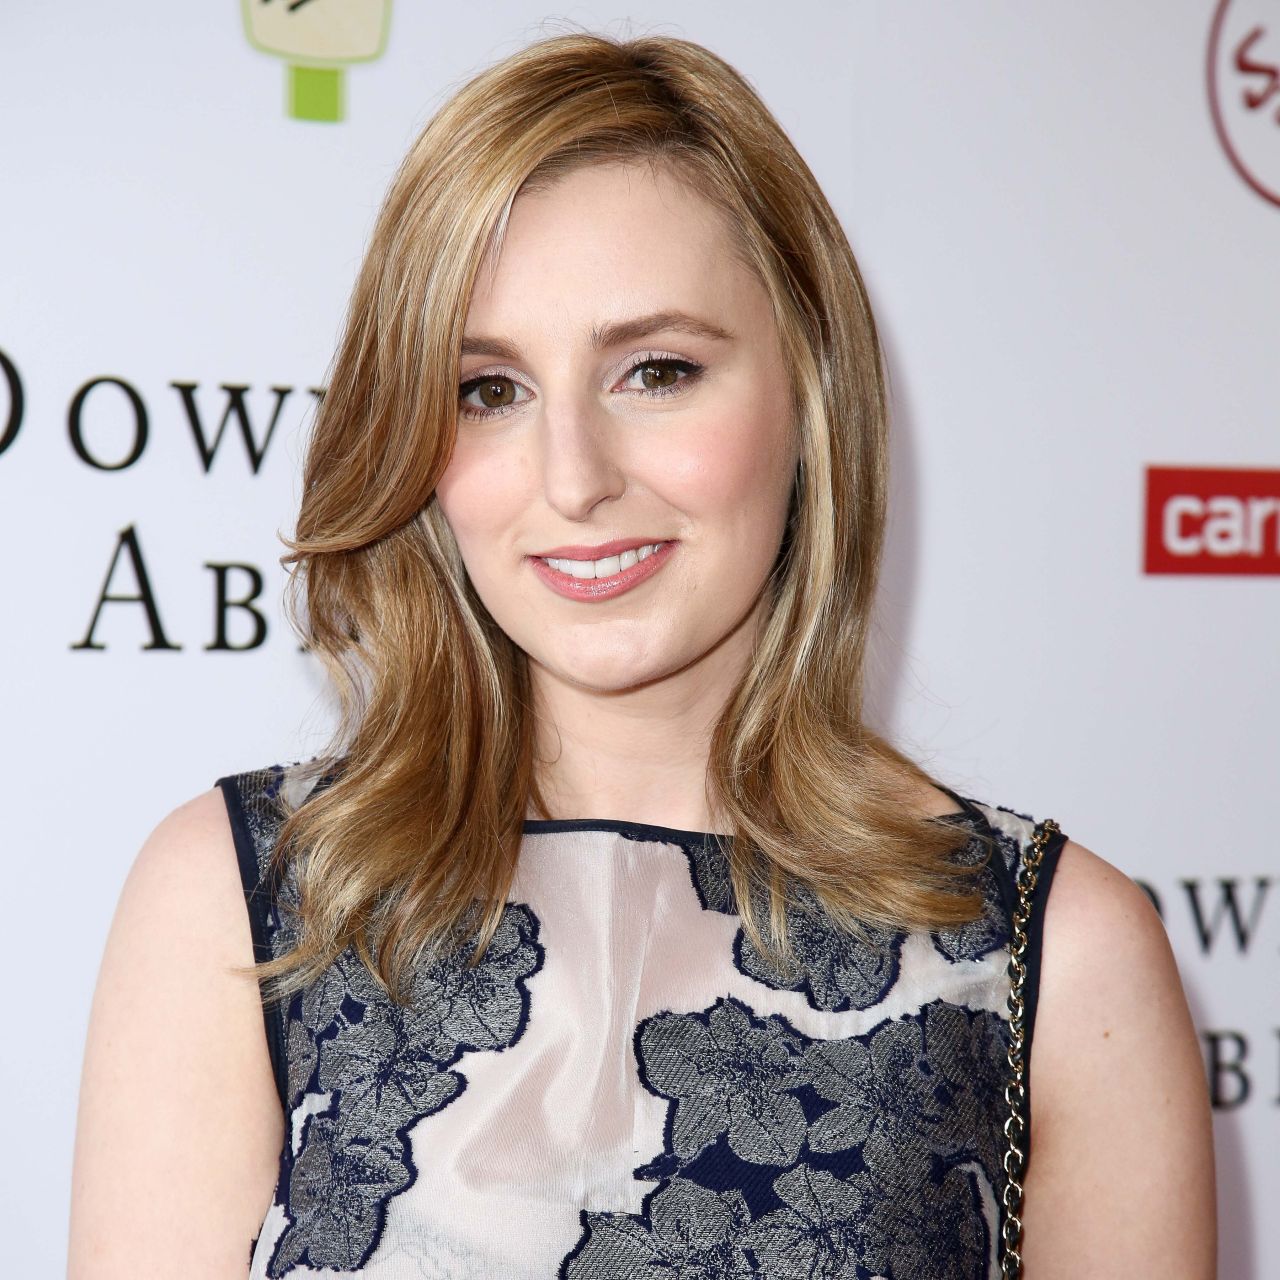 laura-carmichael-an-afternoon-with-downton-abbey-talent-panel-q-a-in-beverl...